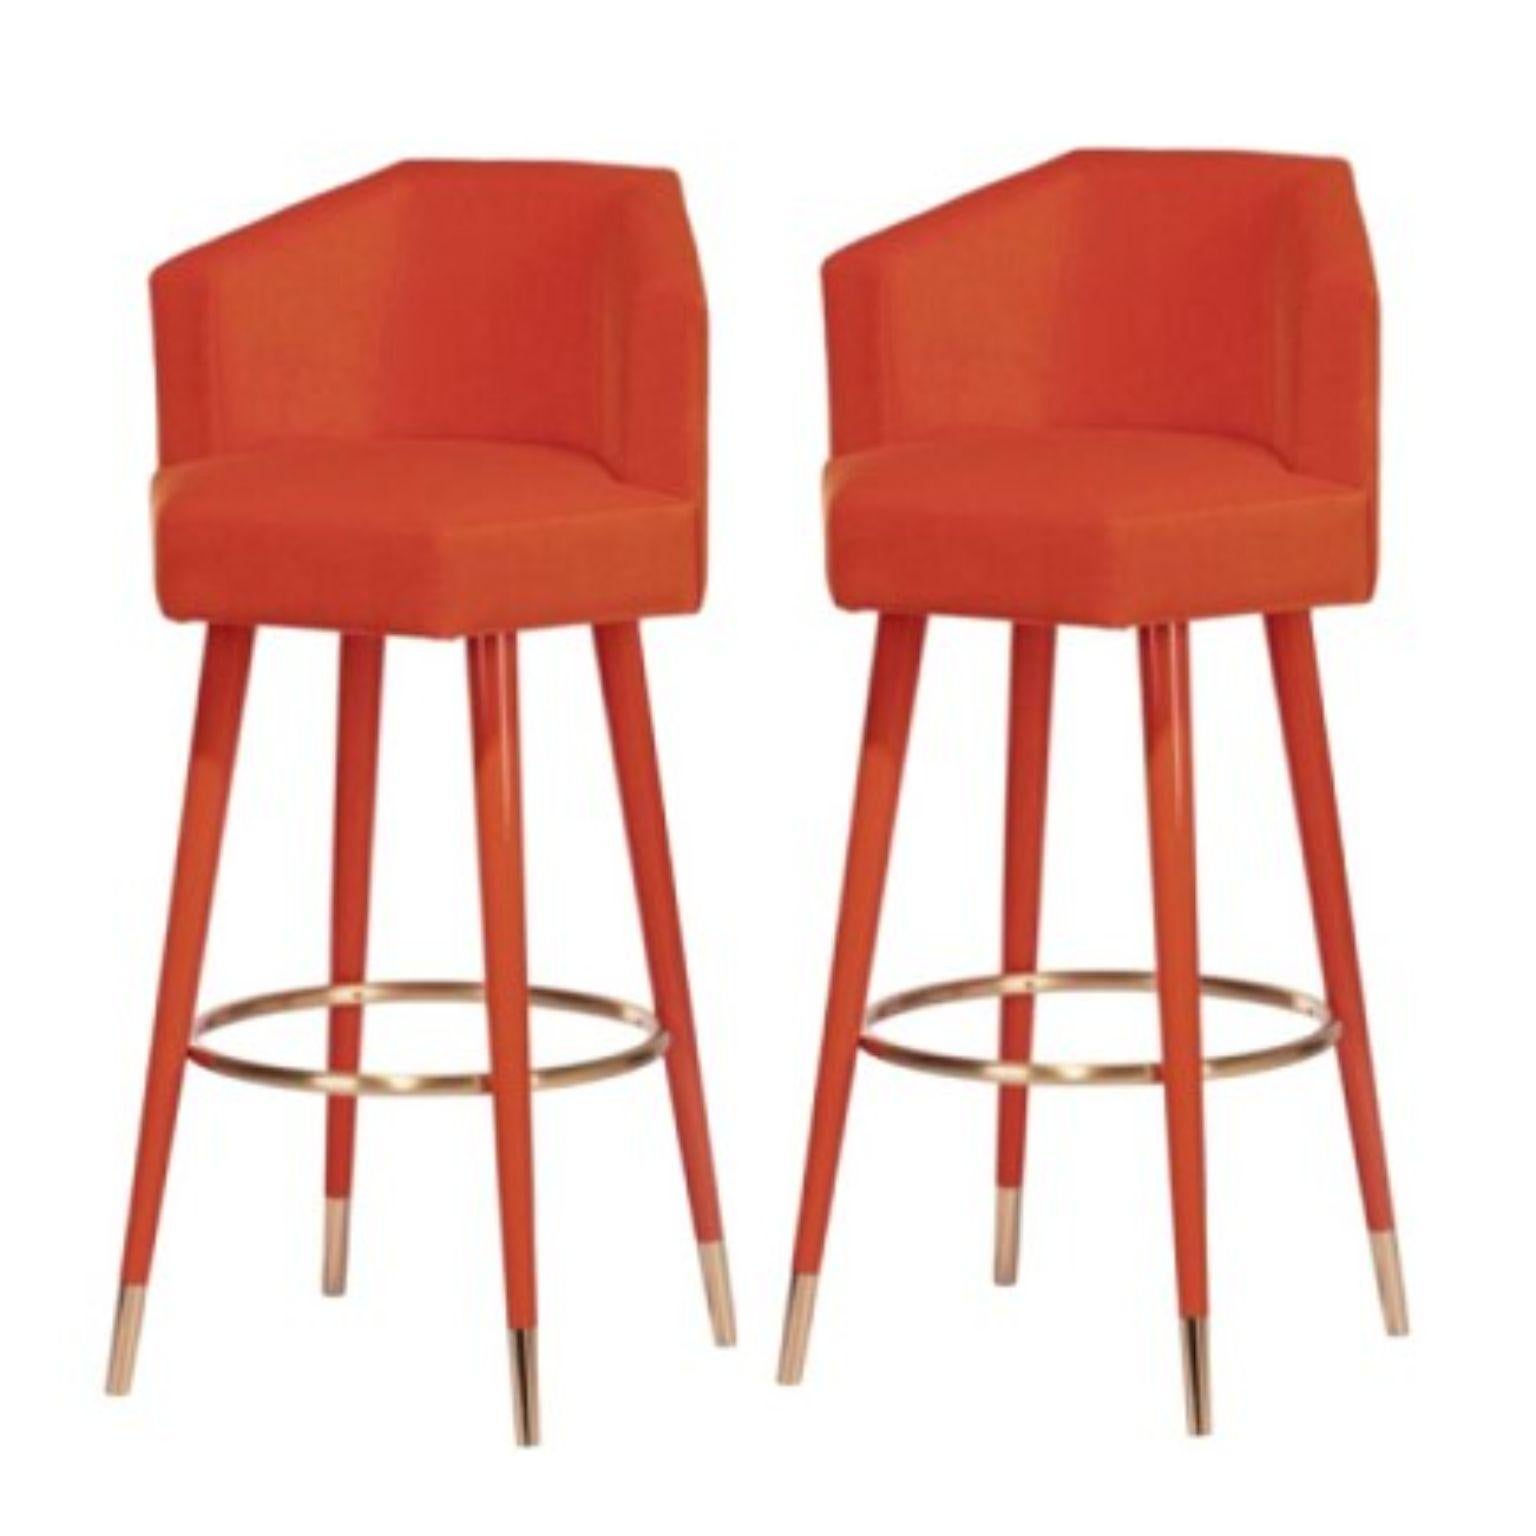 Set of 2 Beelicious bar stools, Royal Stranger
Dimensions: 54.5 x 46 x 107 cm
Materials: Upholstery Zinnia cotton velvet. Legs Zinnia lacquered wood with glossy finish. Feet covers and footrest Brushed Brass.


Royal Stranger is an exclusive